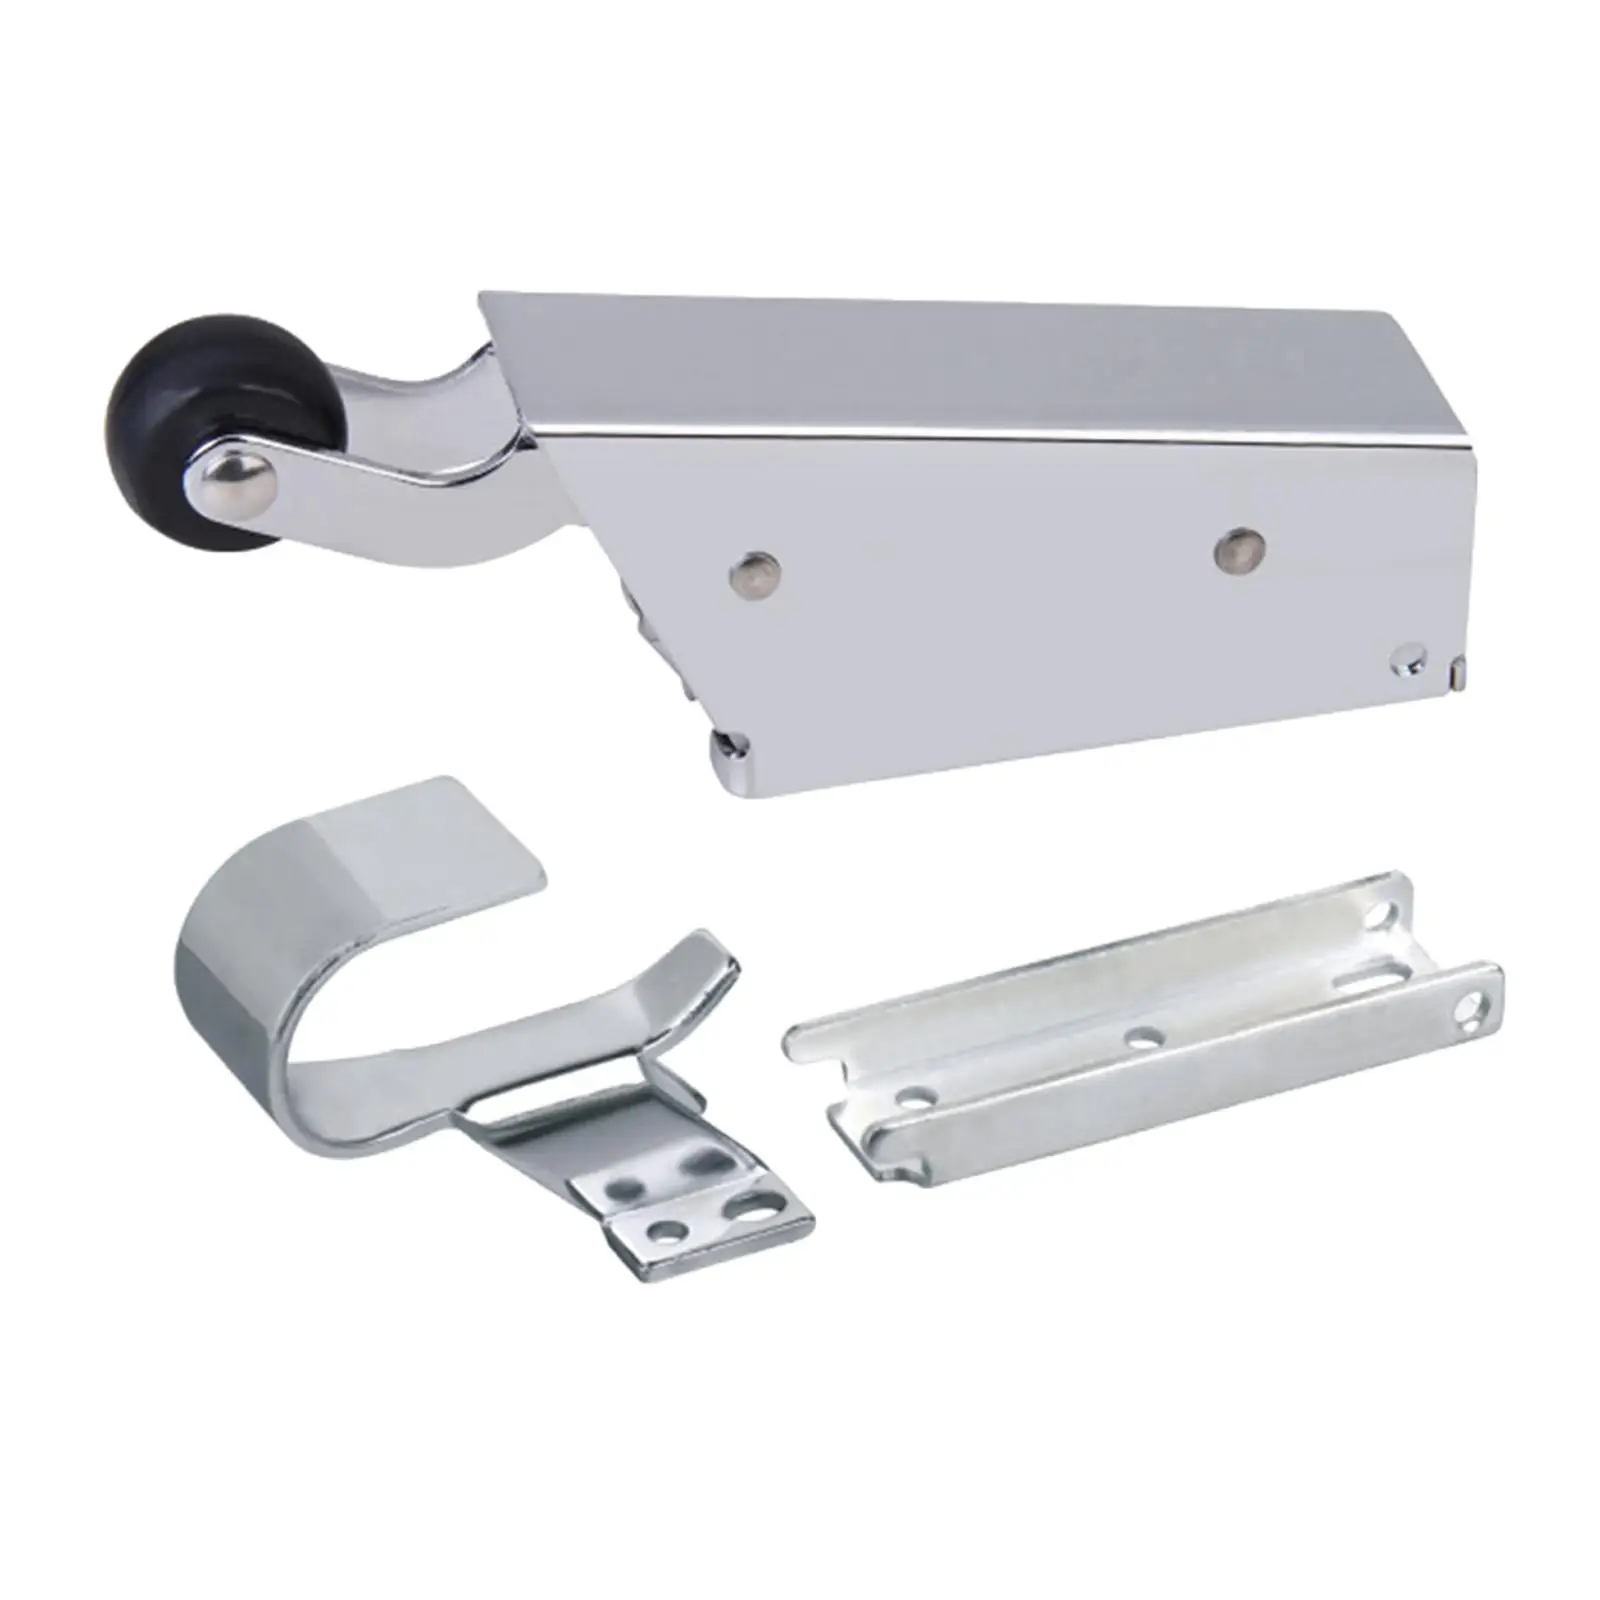 Spring Action Doors Closer Spring Loaded Steel Home Improvement with Quiet Rubber Wheel